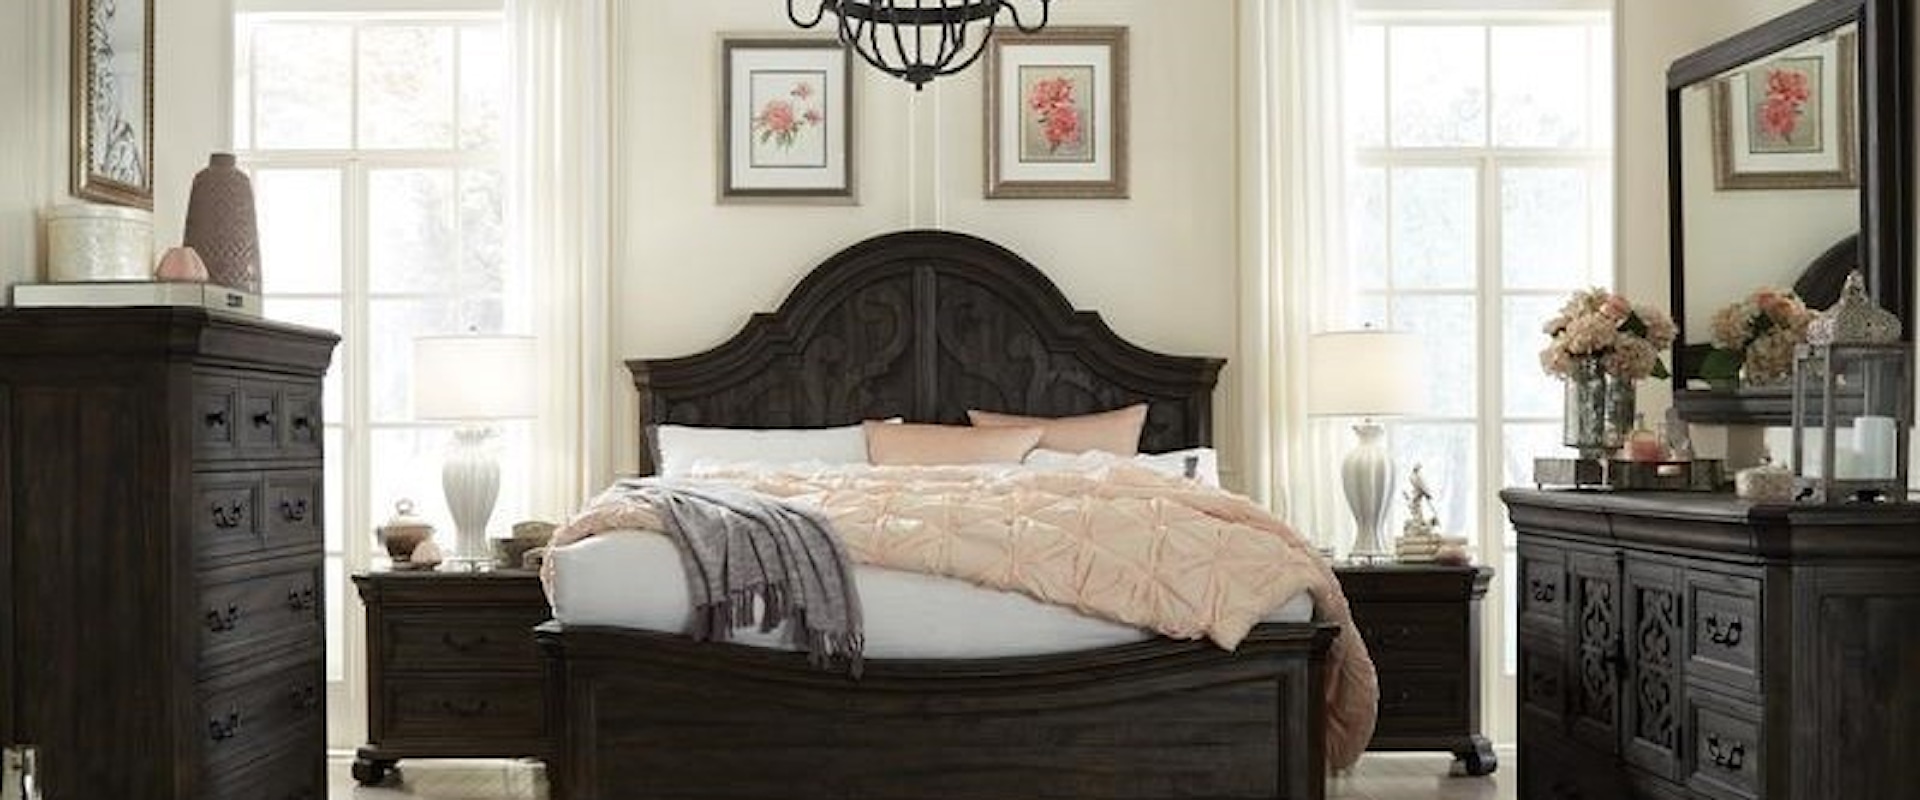 Bedroom Group with Curved Queen Bed and Mirror